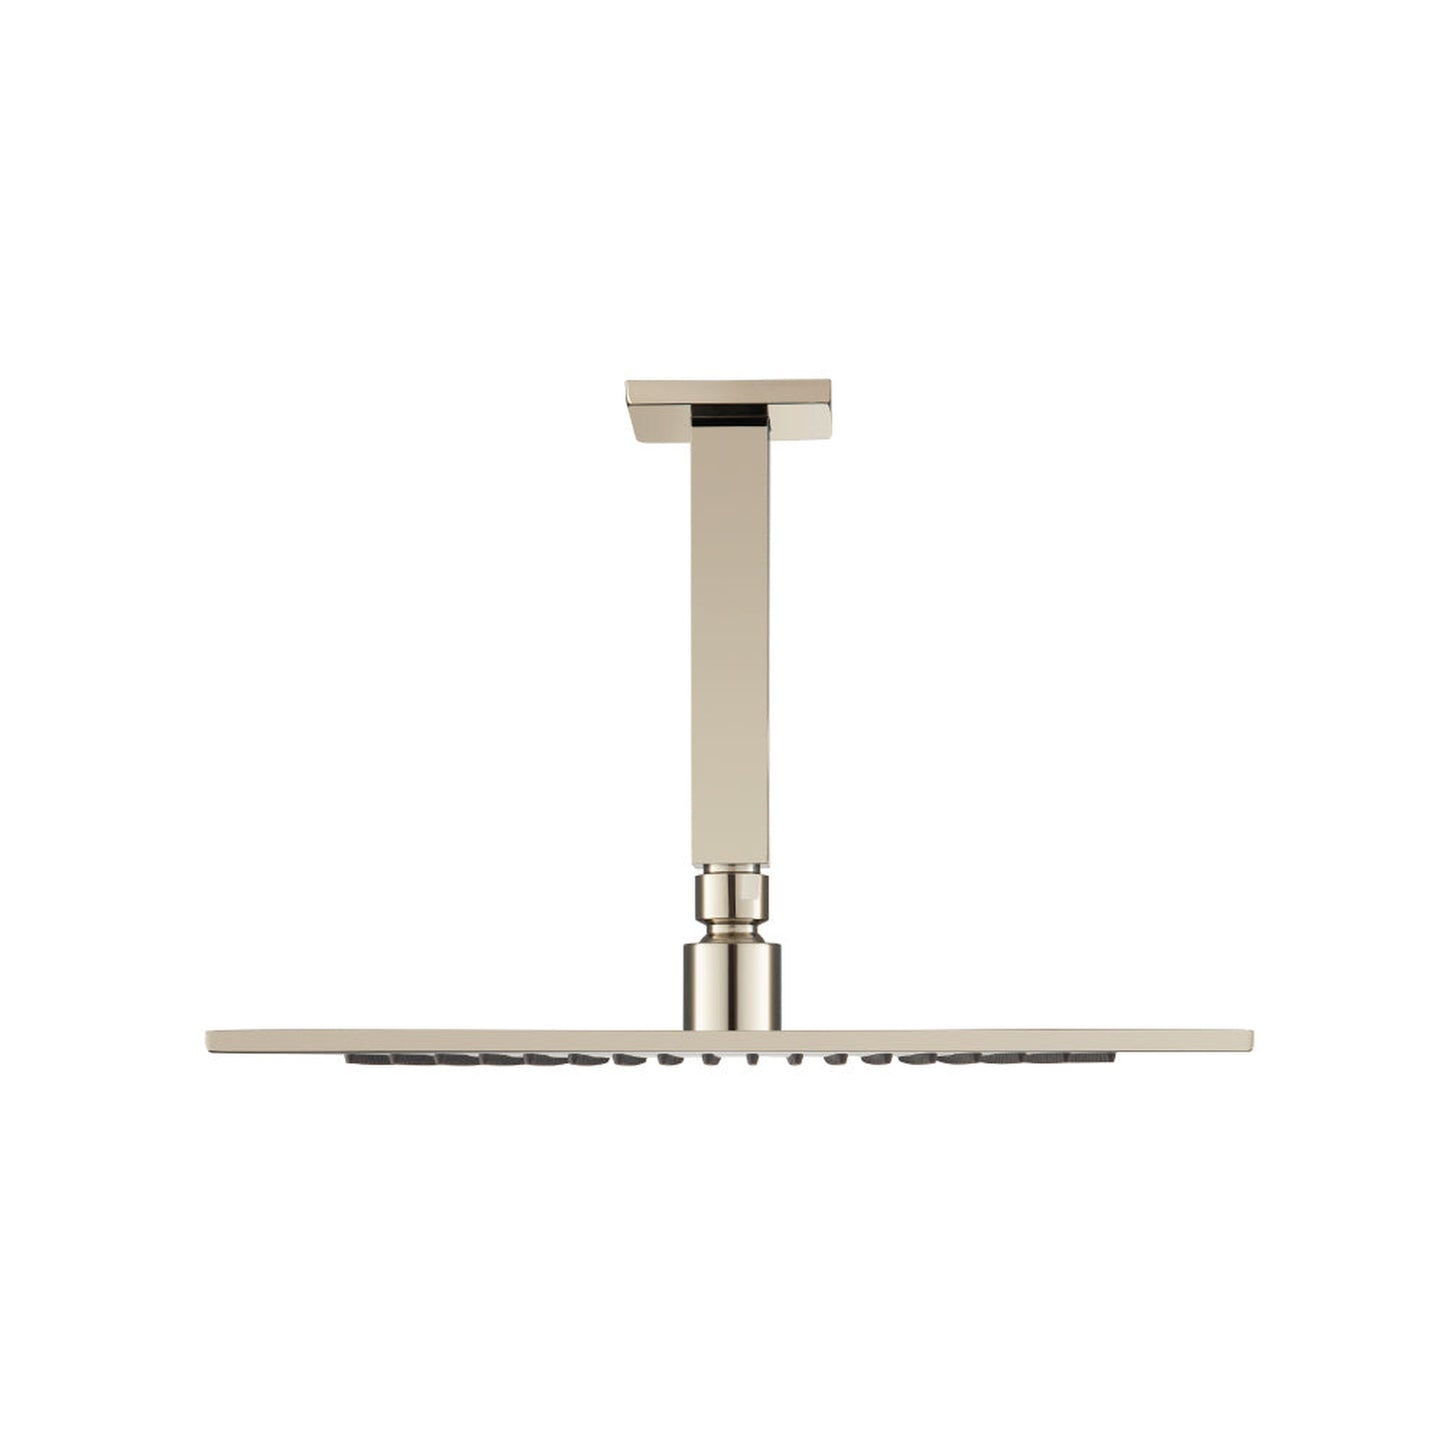 Isenberg Universal Fixtures 12" Single Function Square Polished Nickel PVD Solid Brass Rain Shower Head With 6" Ceiling Mounted Shower Arm